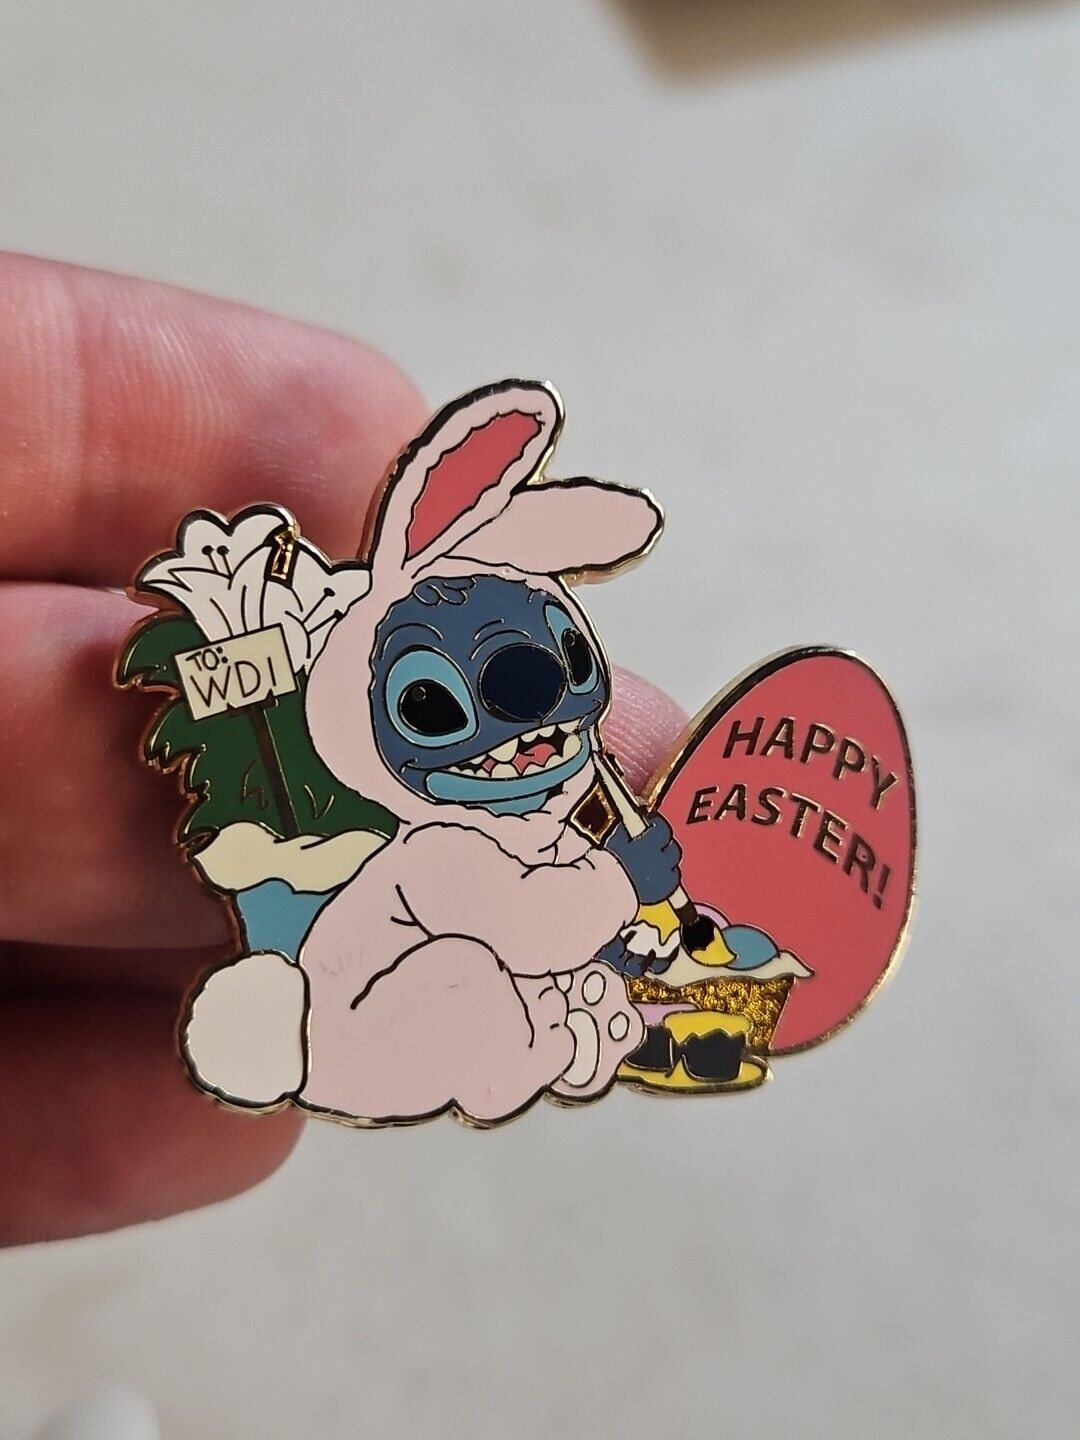 Disney WDI 2012 Easter Stitch In a Bunny Suit LE 250 Disney Pin 89736